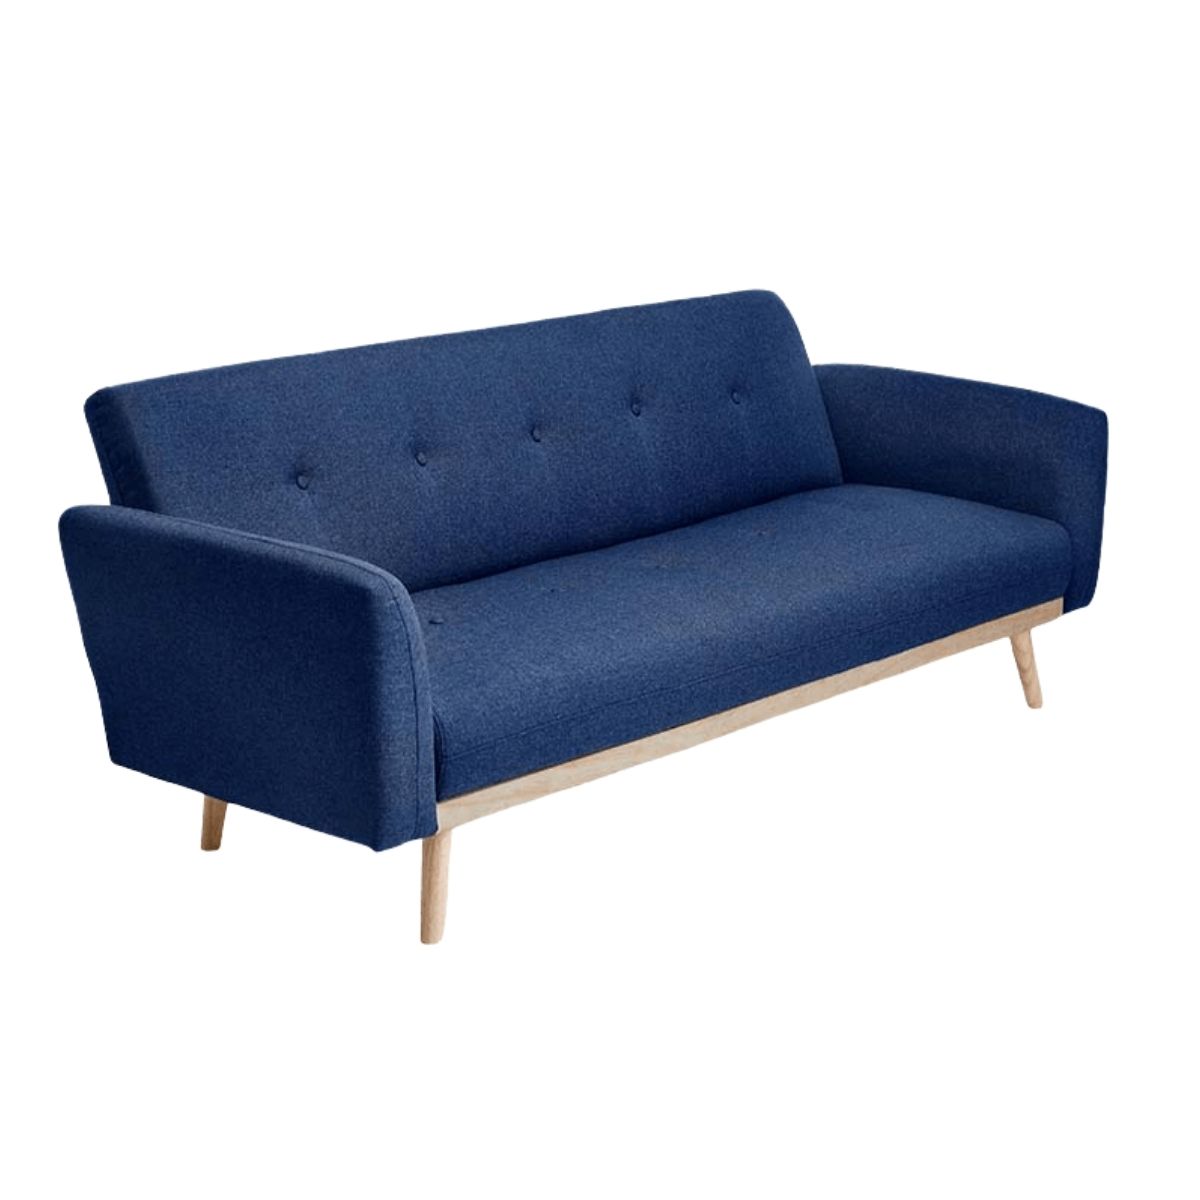 Fatherday-furniture 3-Seater Blue Foldable Sofa Bed